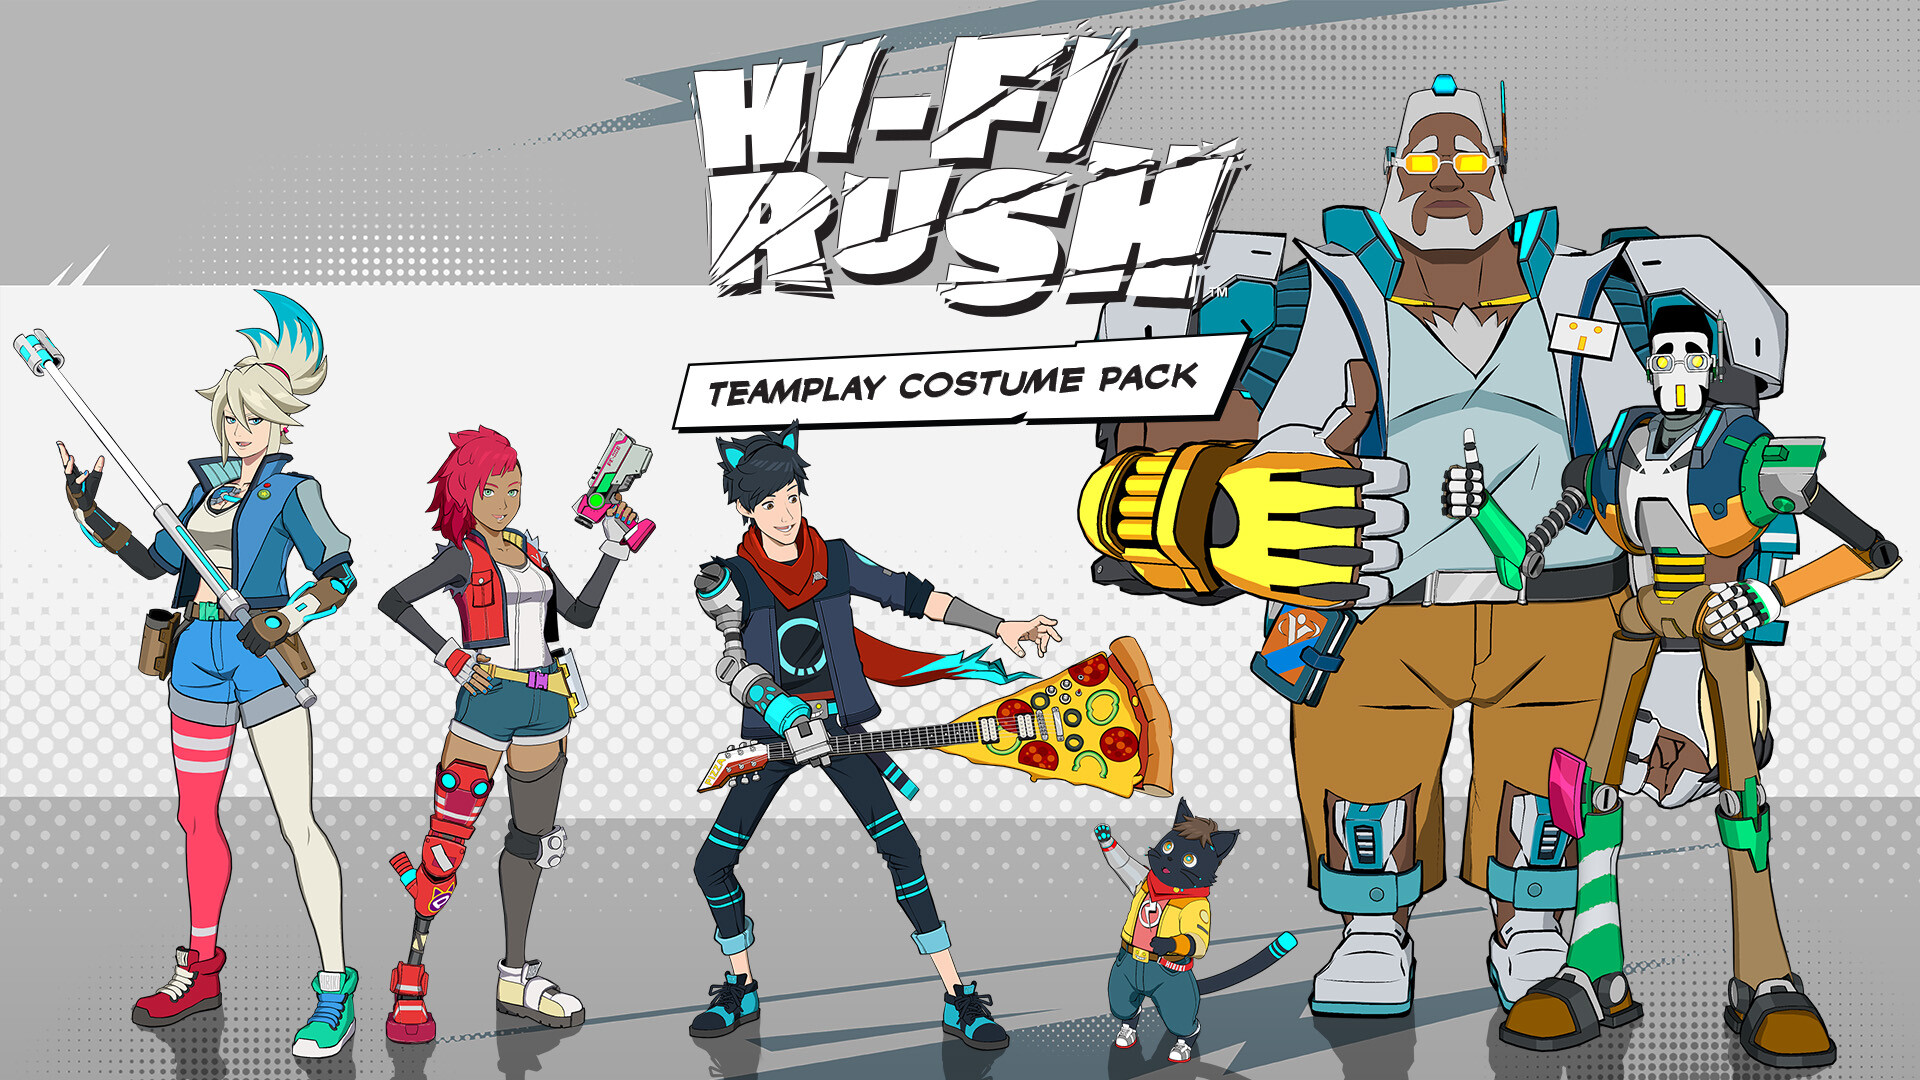 Hi-Fi Rush Launches Teamplay Costume Pack for Purchase